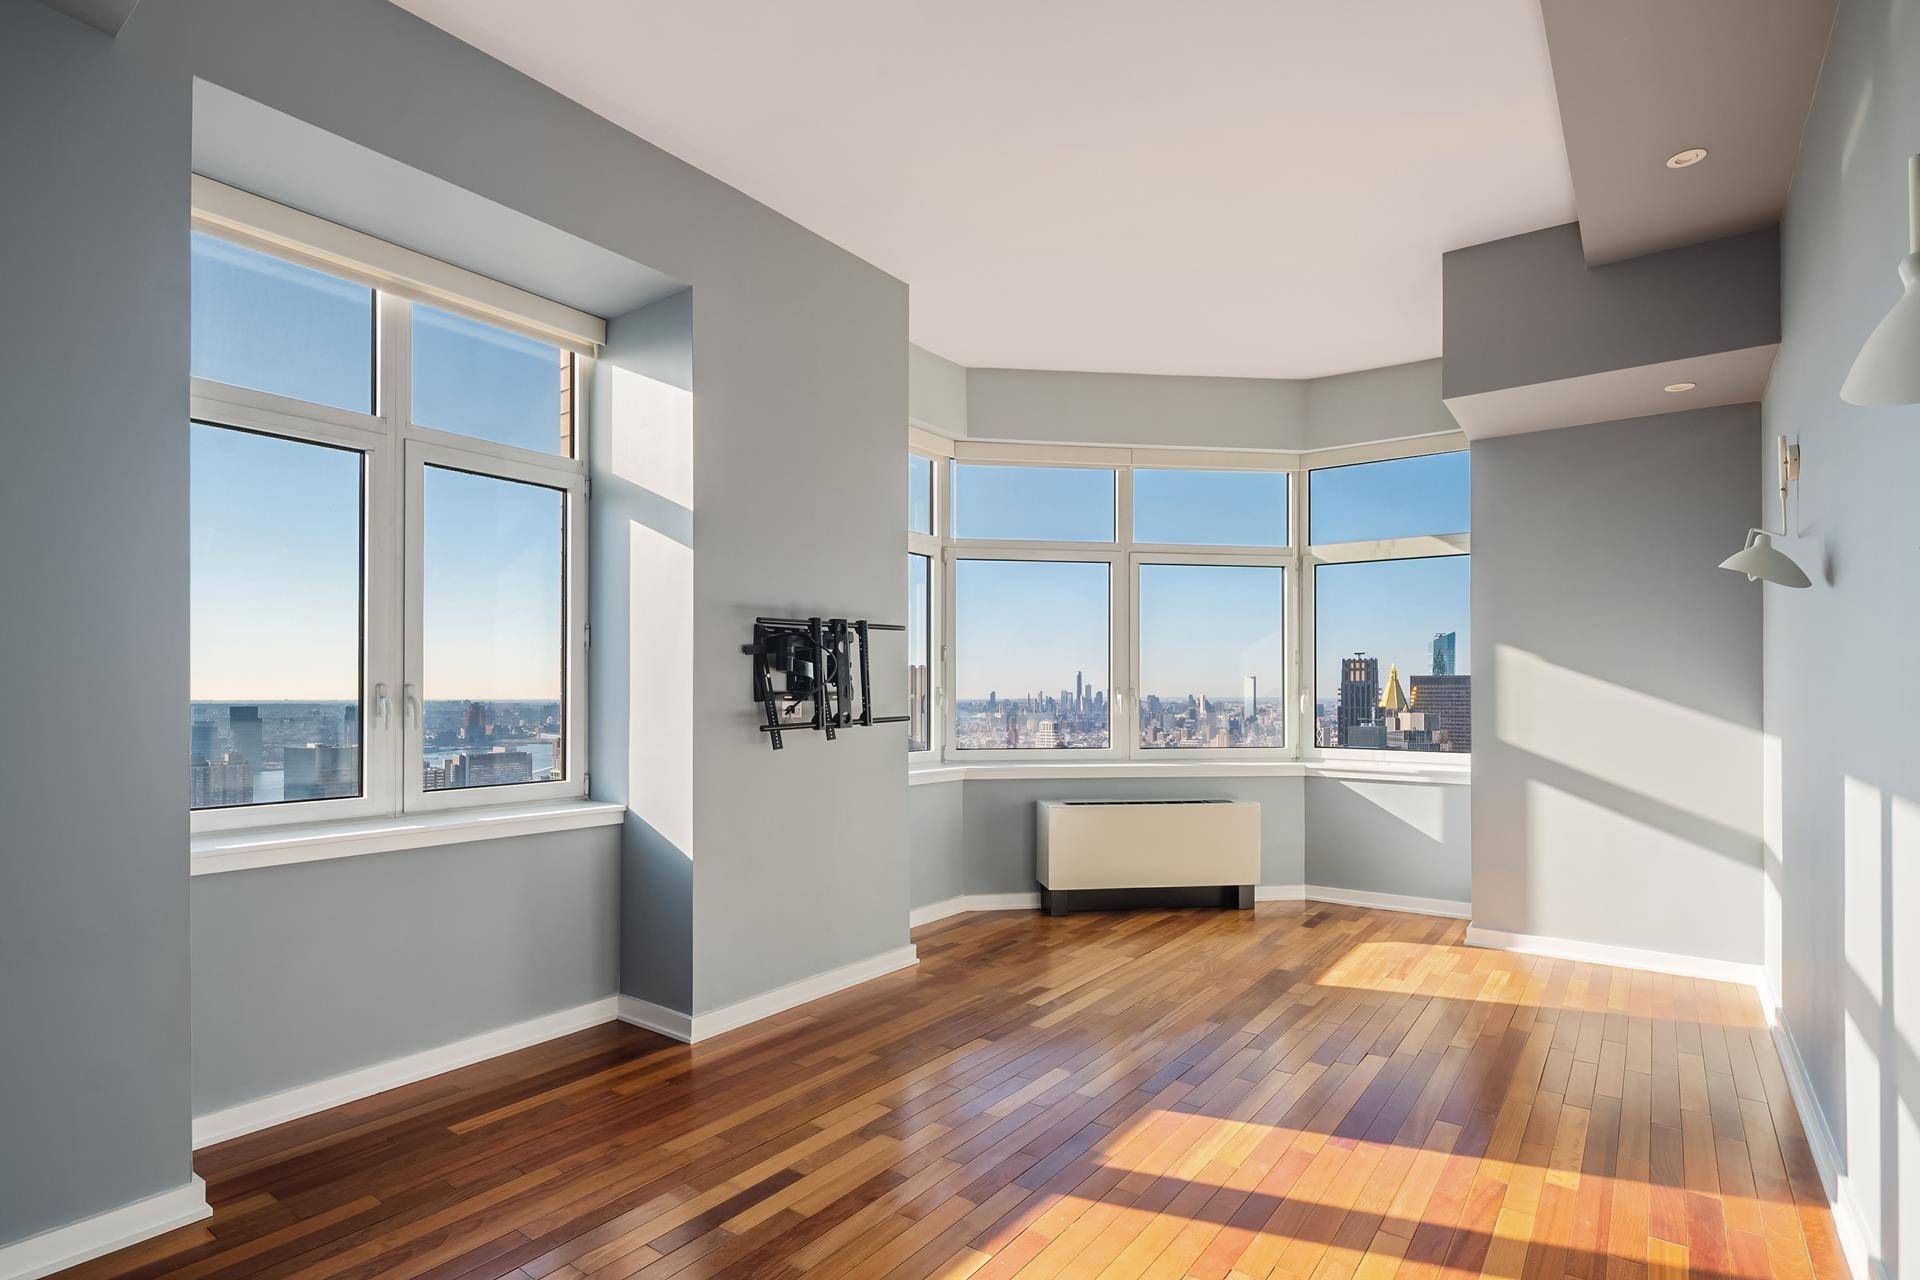 Rarely available 2 bedroom 2 bath residence on the very quiet and private 58th floor.